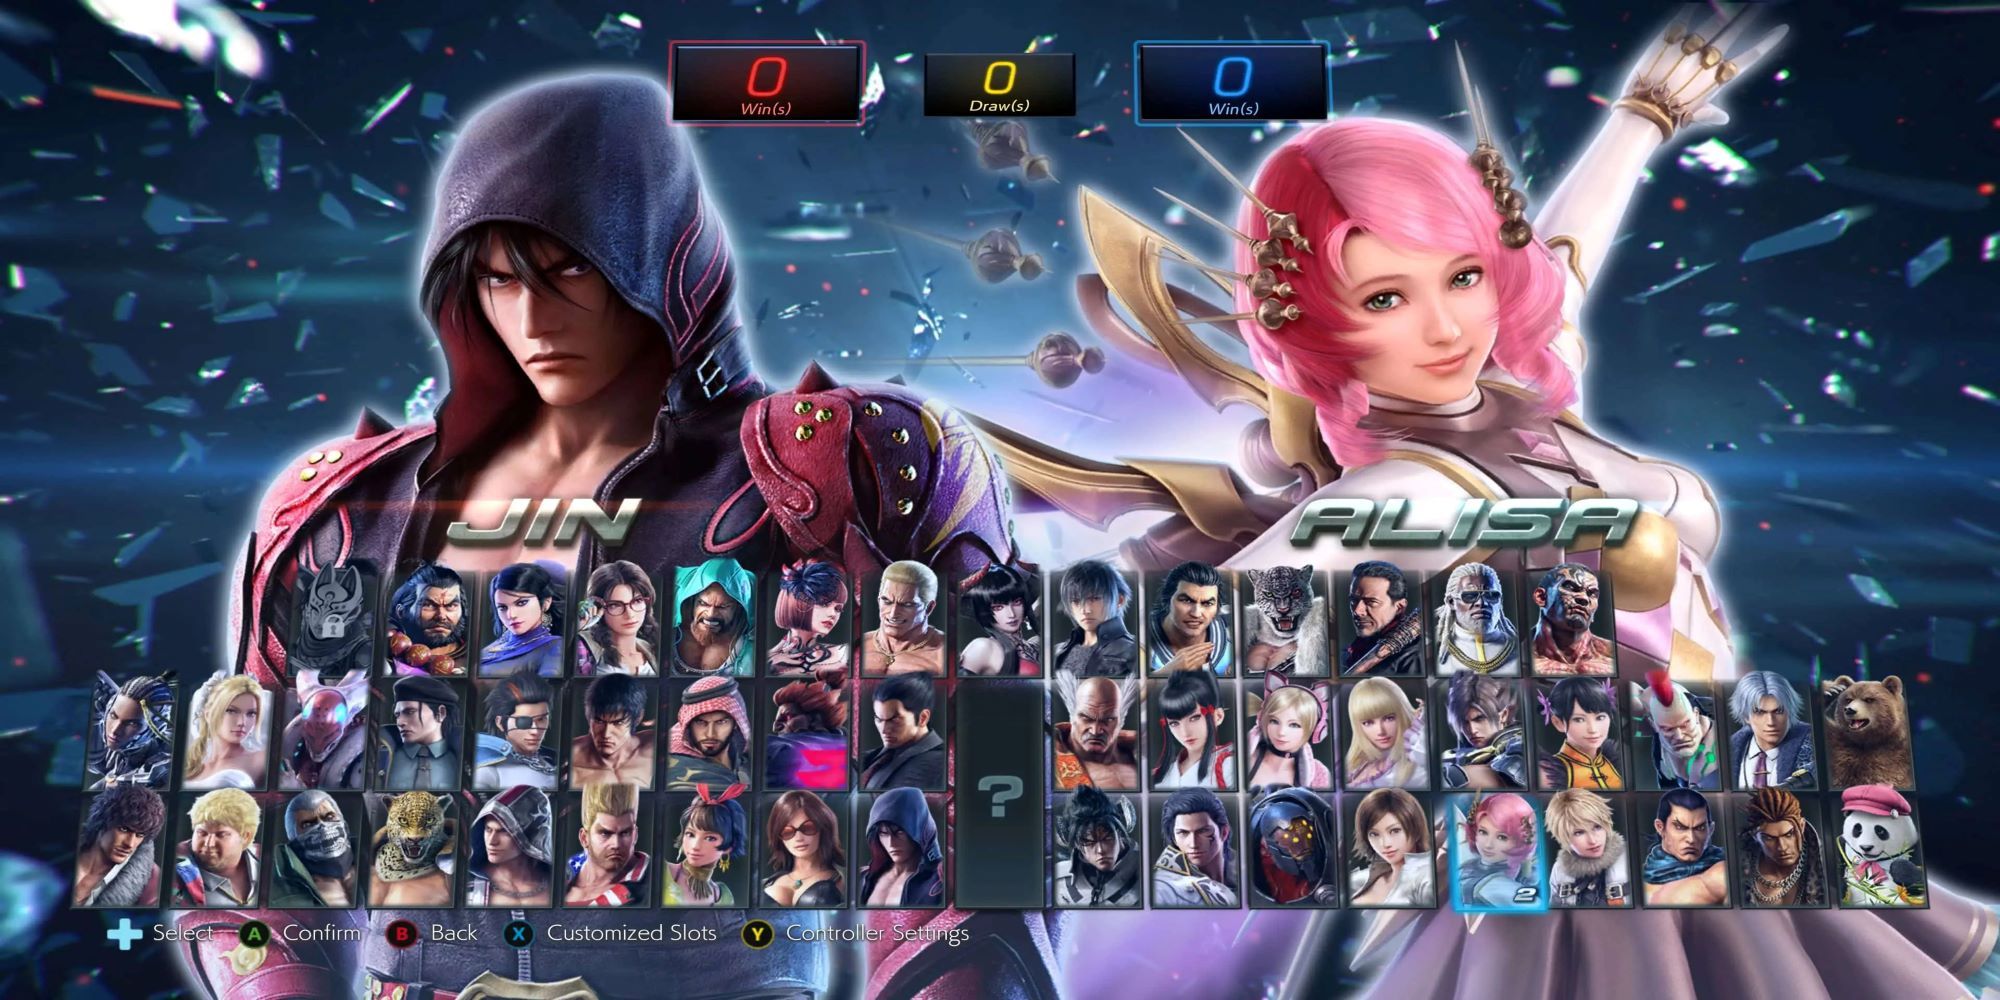 Character Selection Screen from Tekken 7 featuring Jin and Alisa